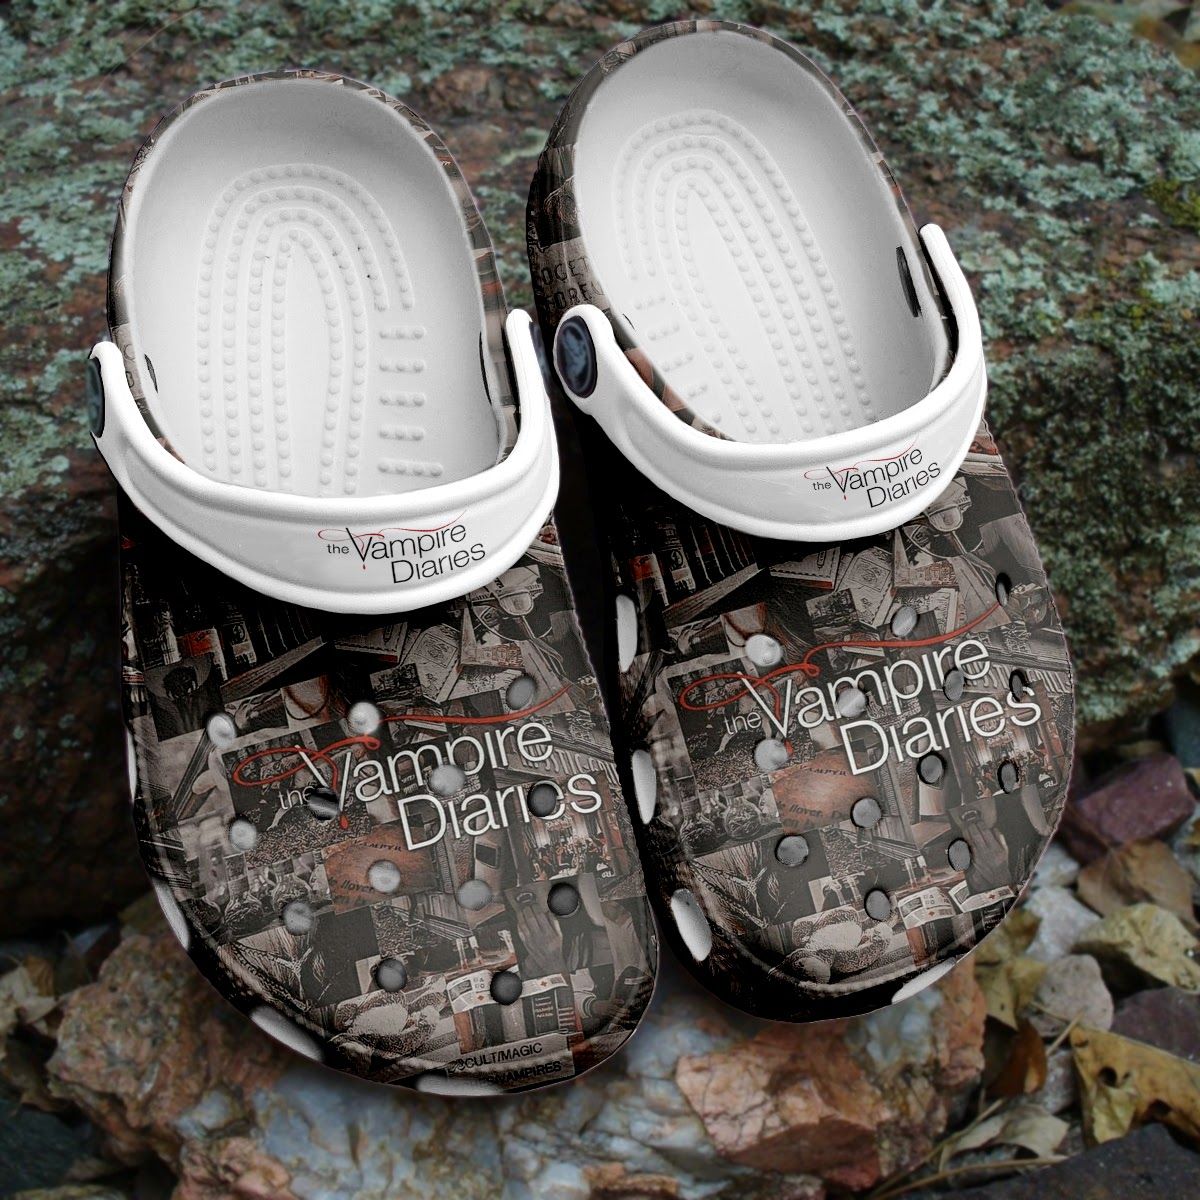 If you'd like to purchase a pair of Crocband Clogs, be sure to check out the official website. 158